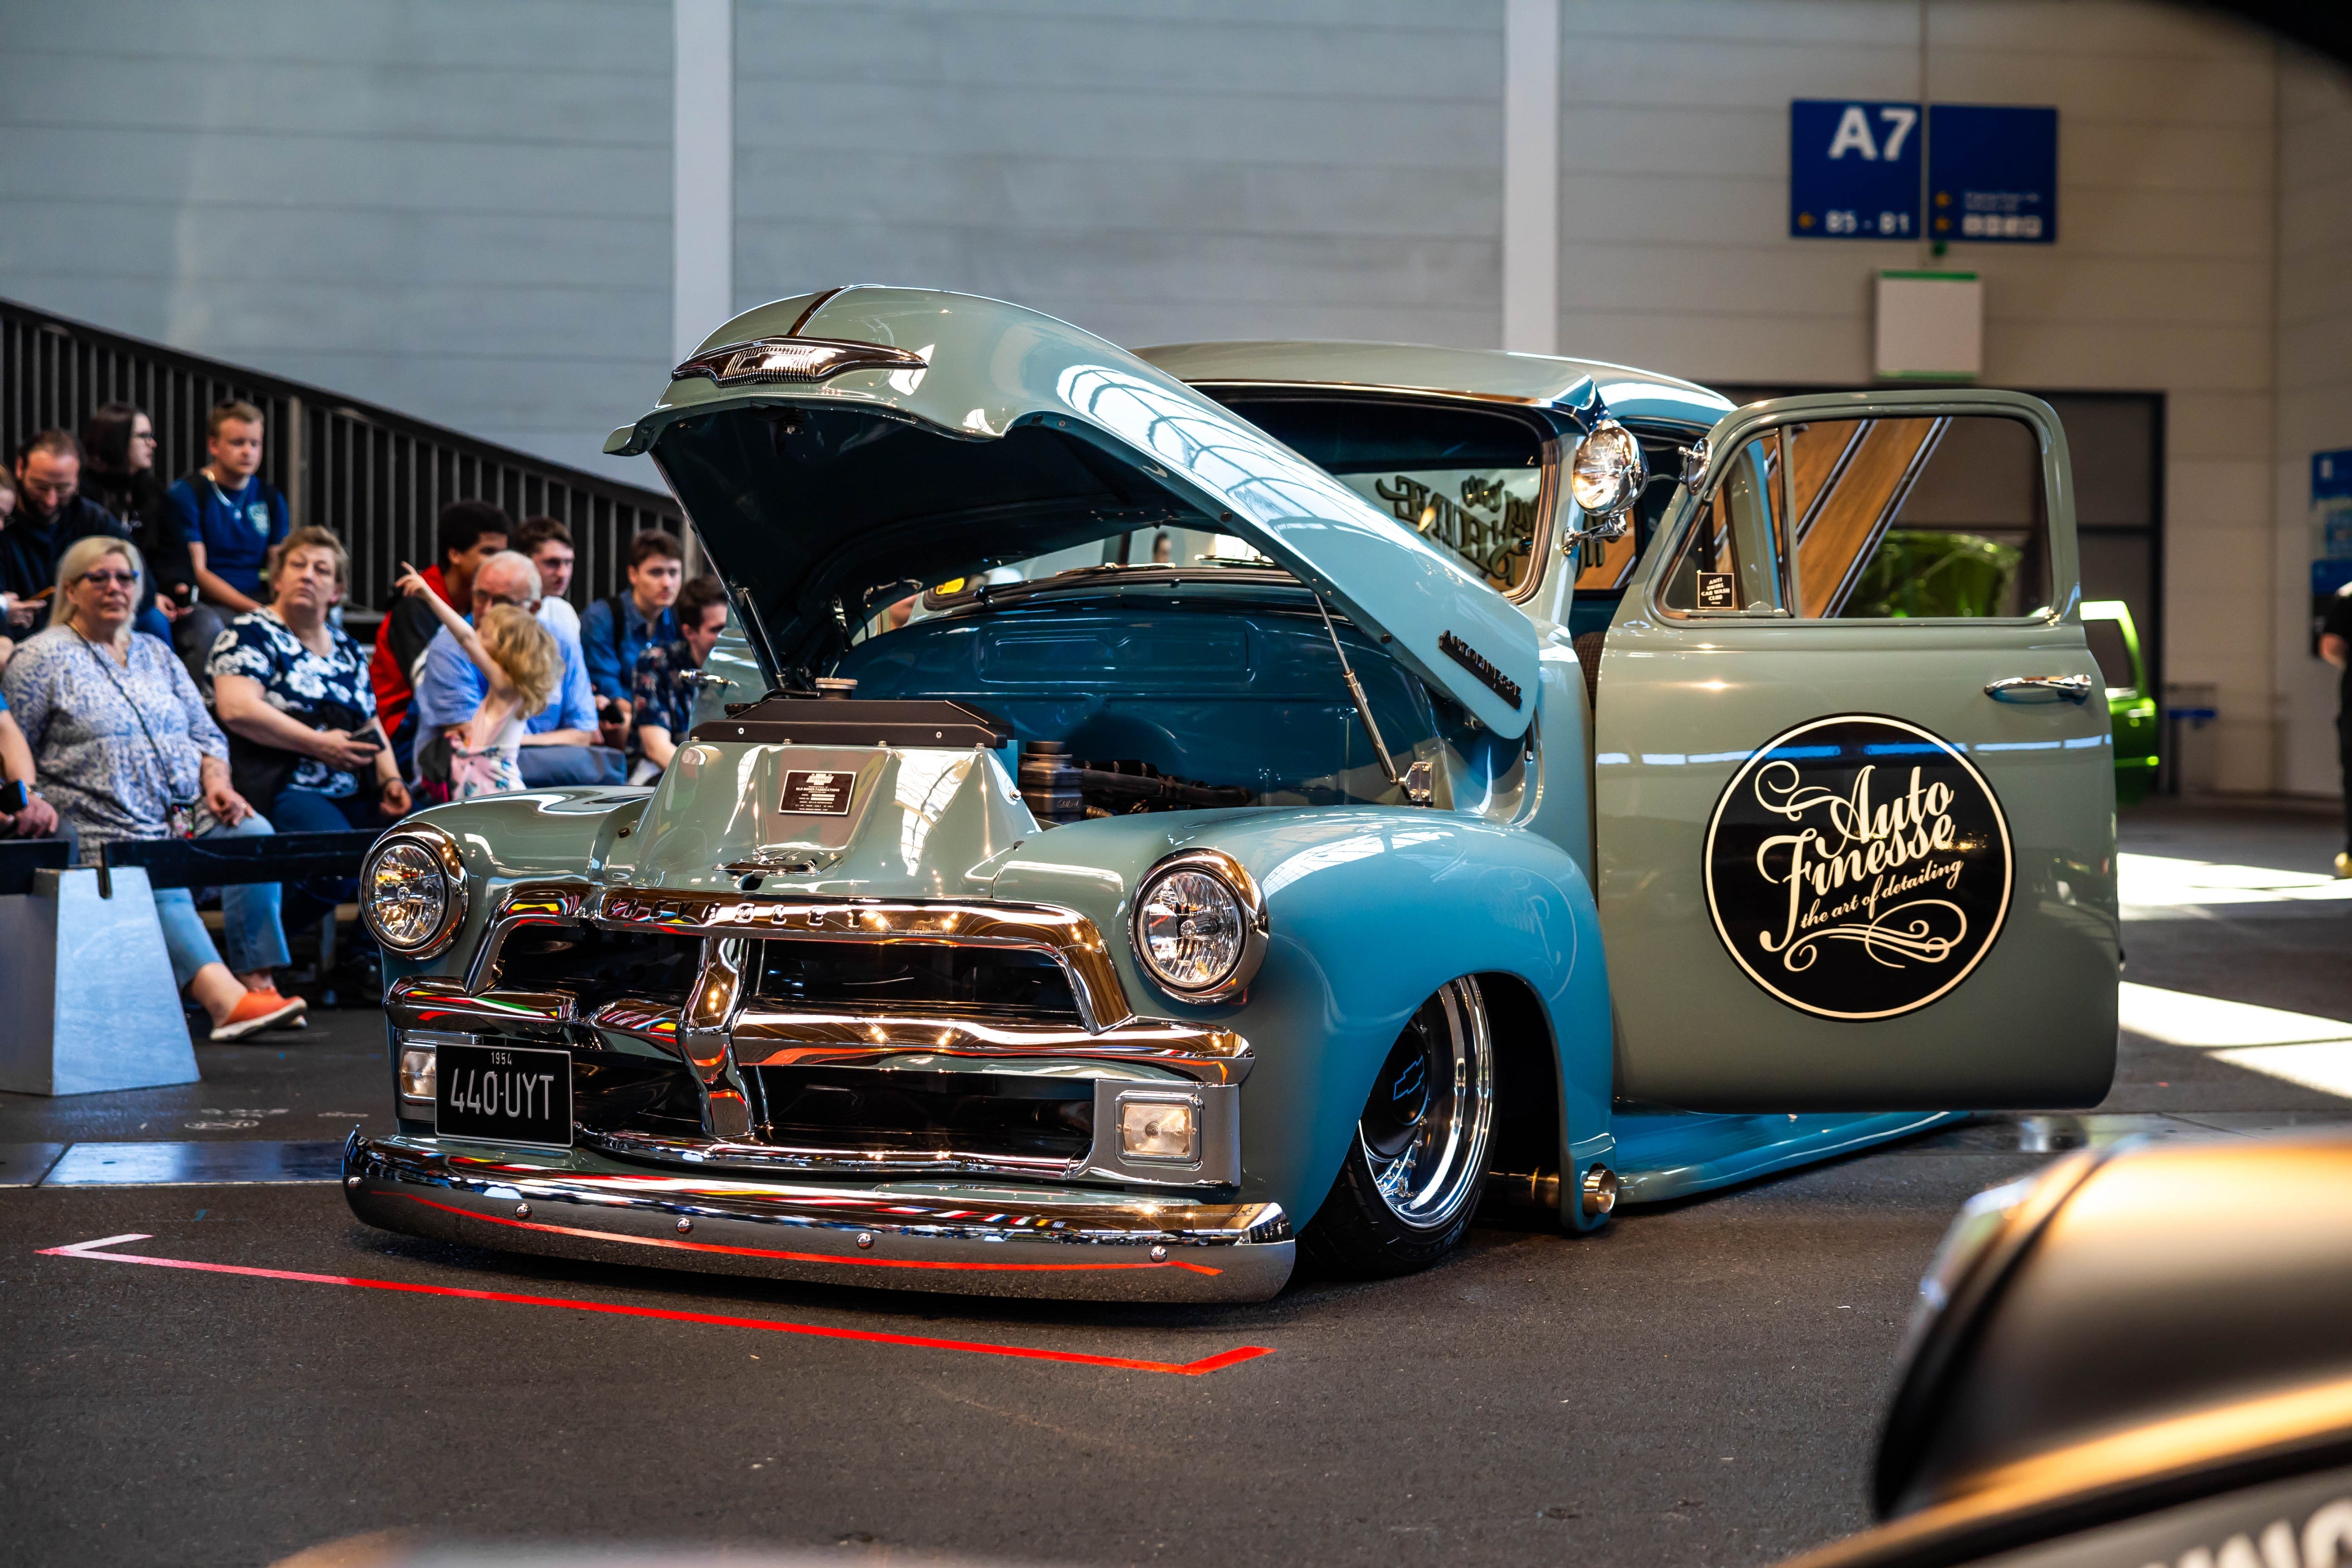 AF Chevy Wins European Tuning Showdown at Bodensee